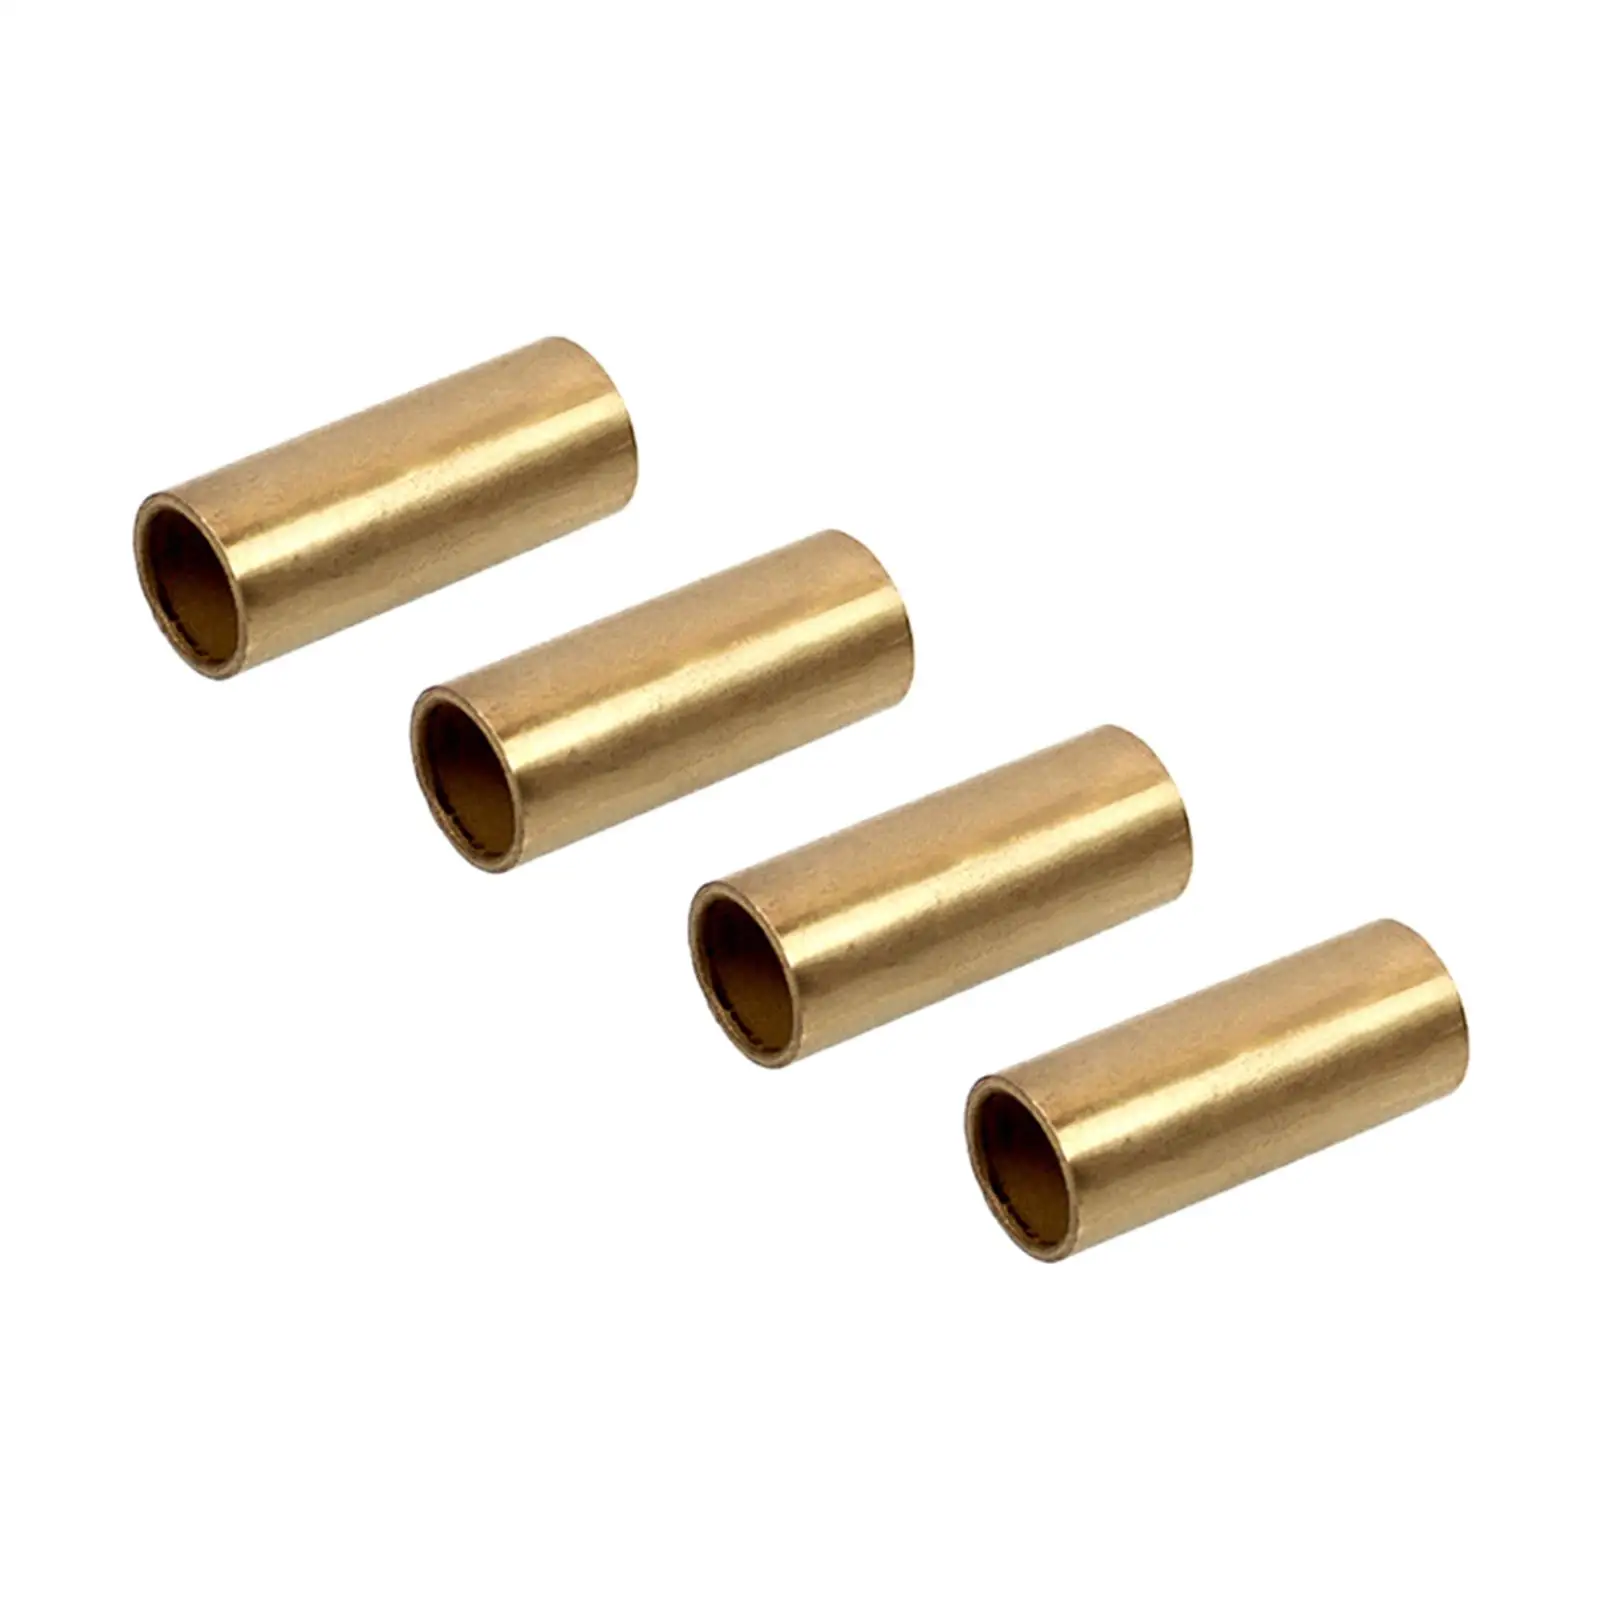 4Pcs Bronze Leaf Spring Shackle Bushings K7129100 Easy to Install Strong Direct Replaces High Performance for Dexter Axle